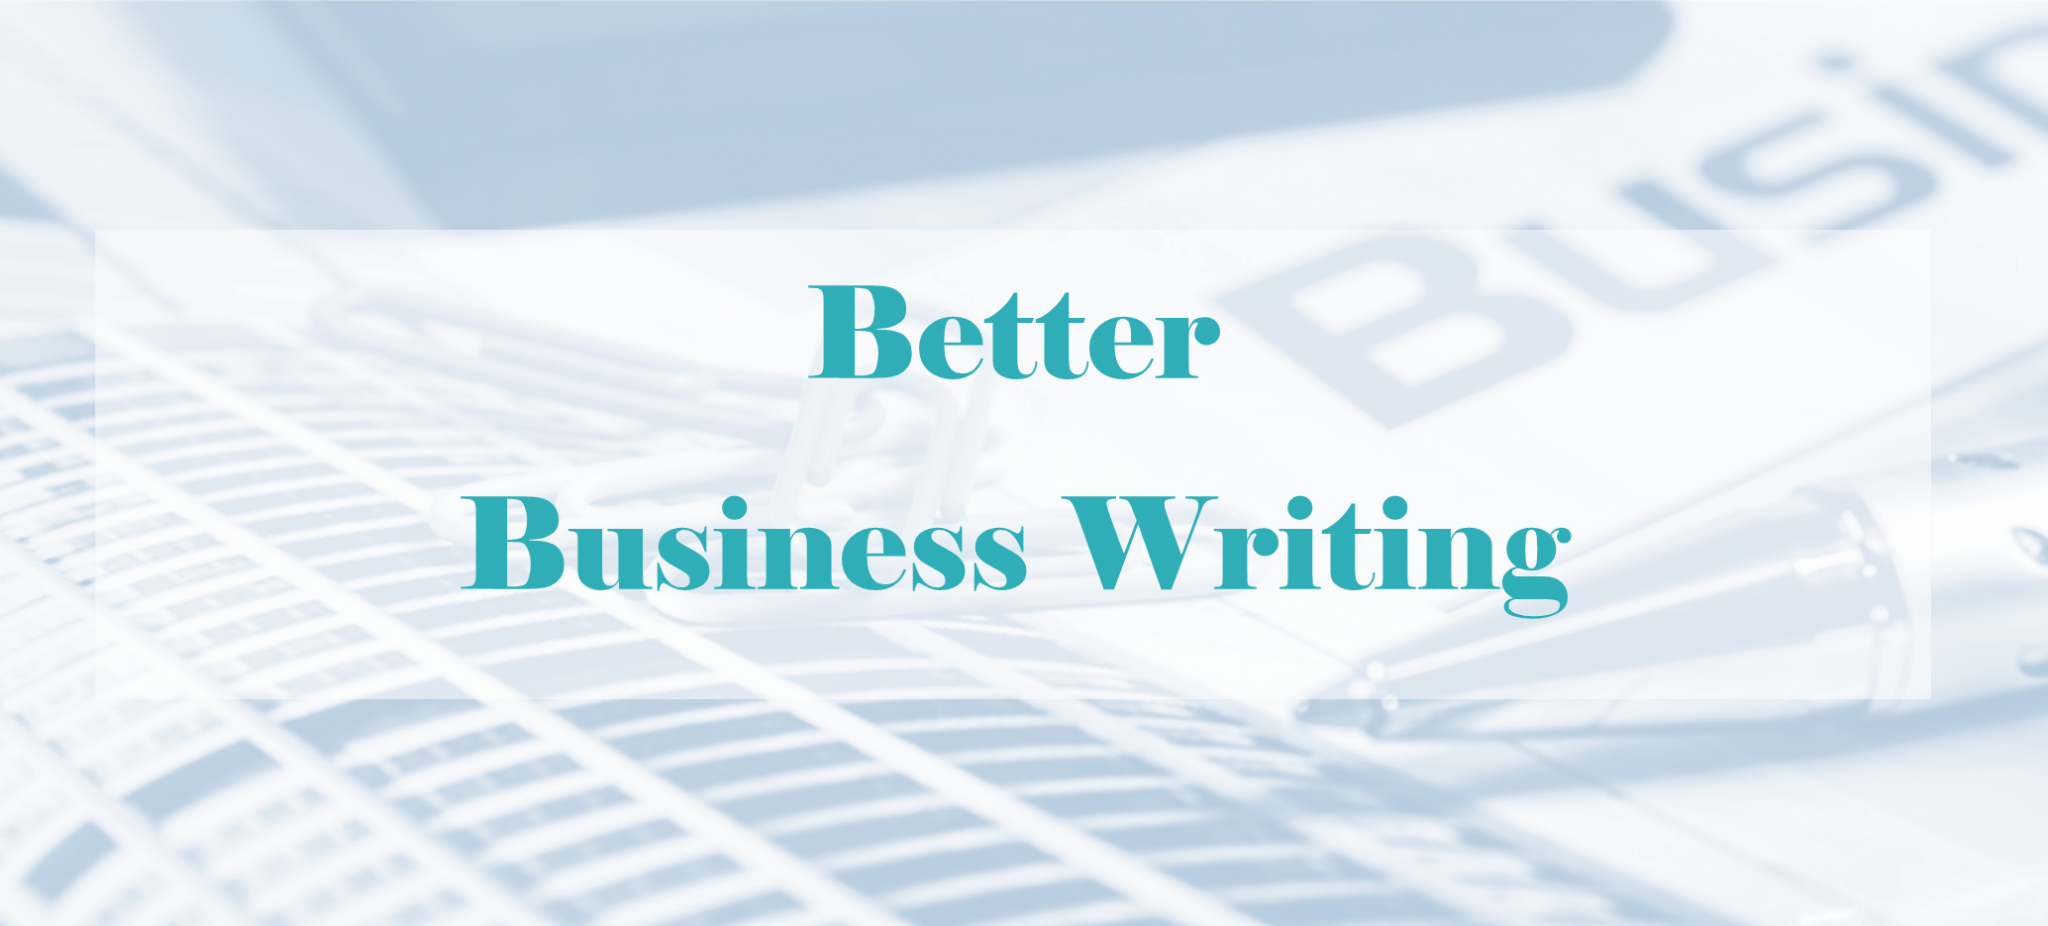 better business writing skills download